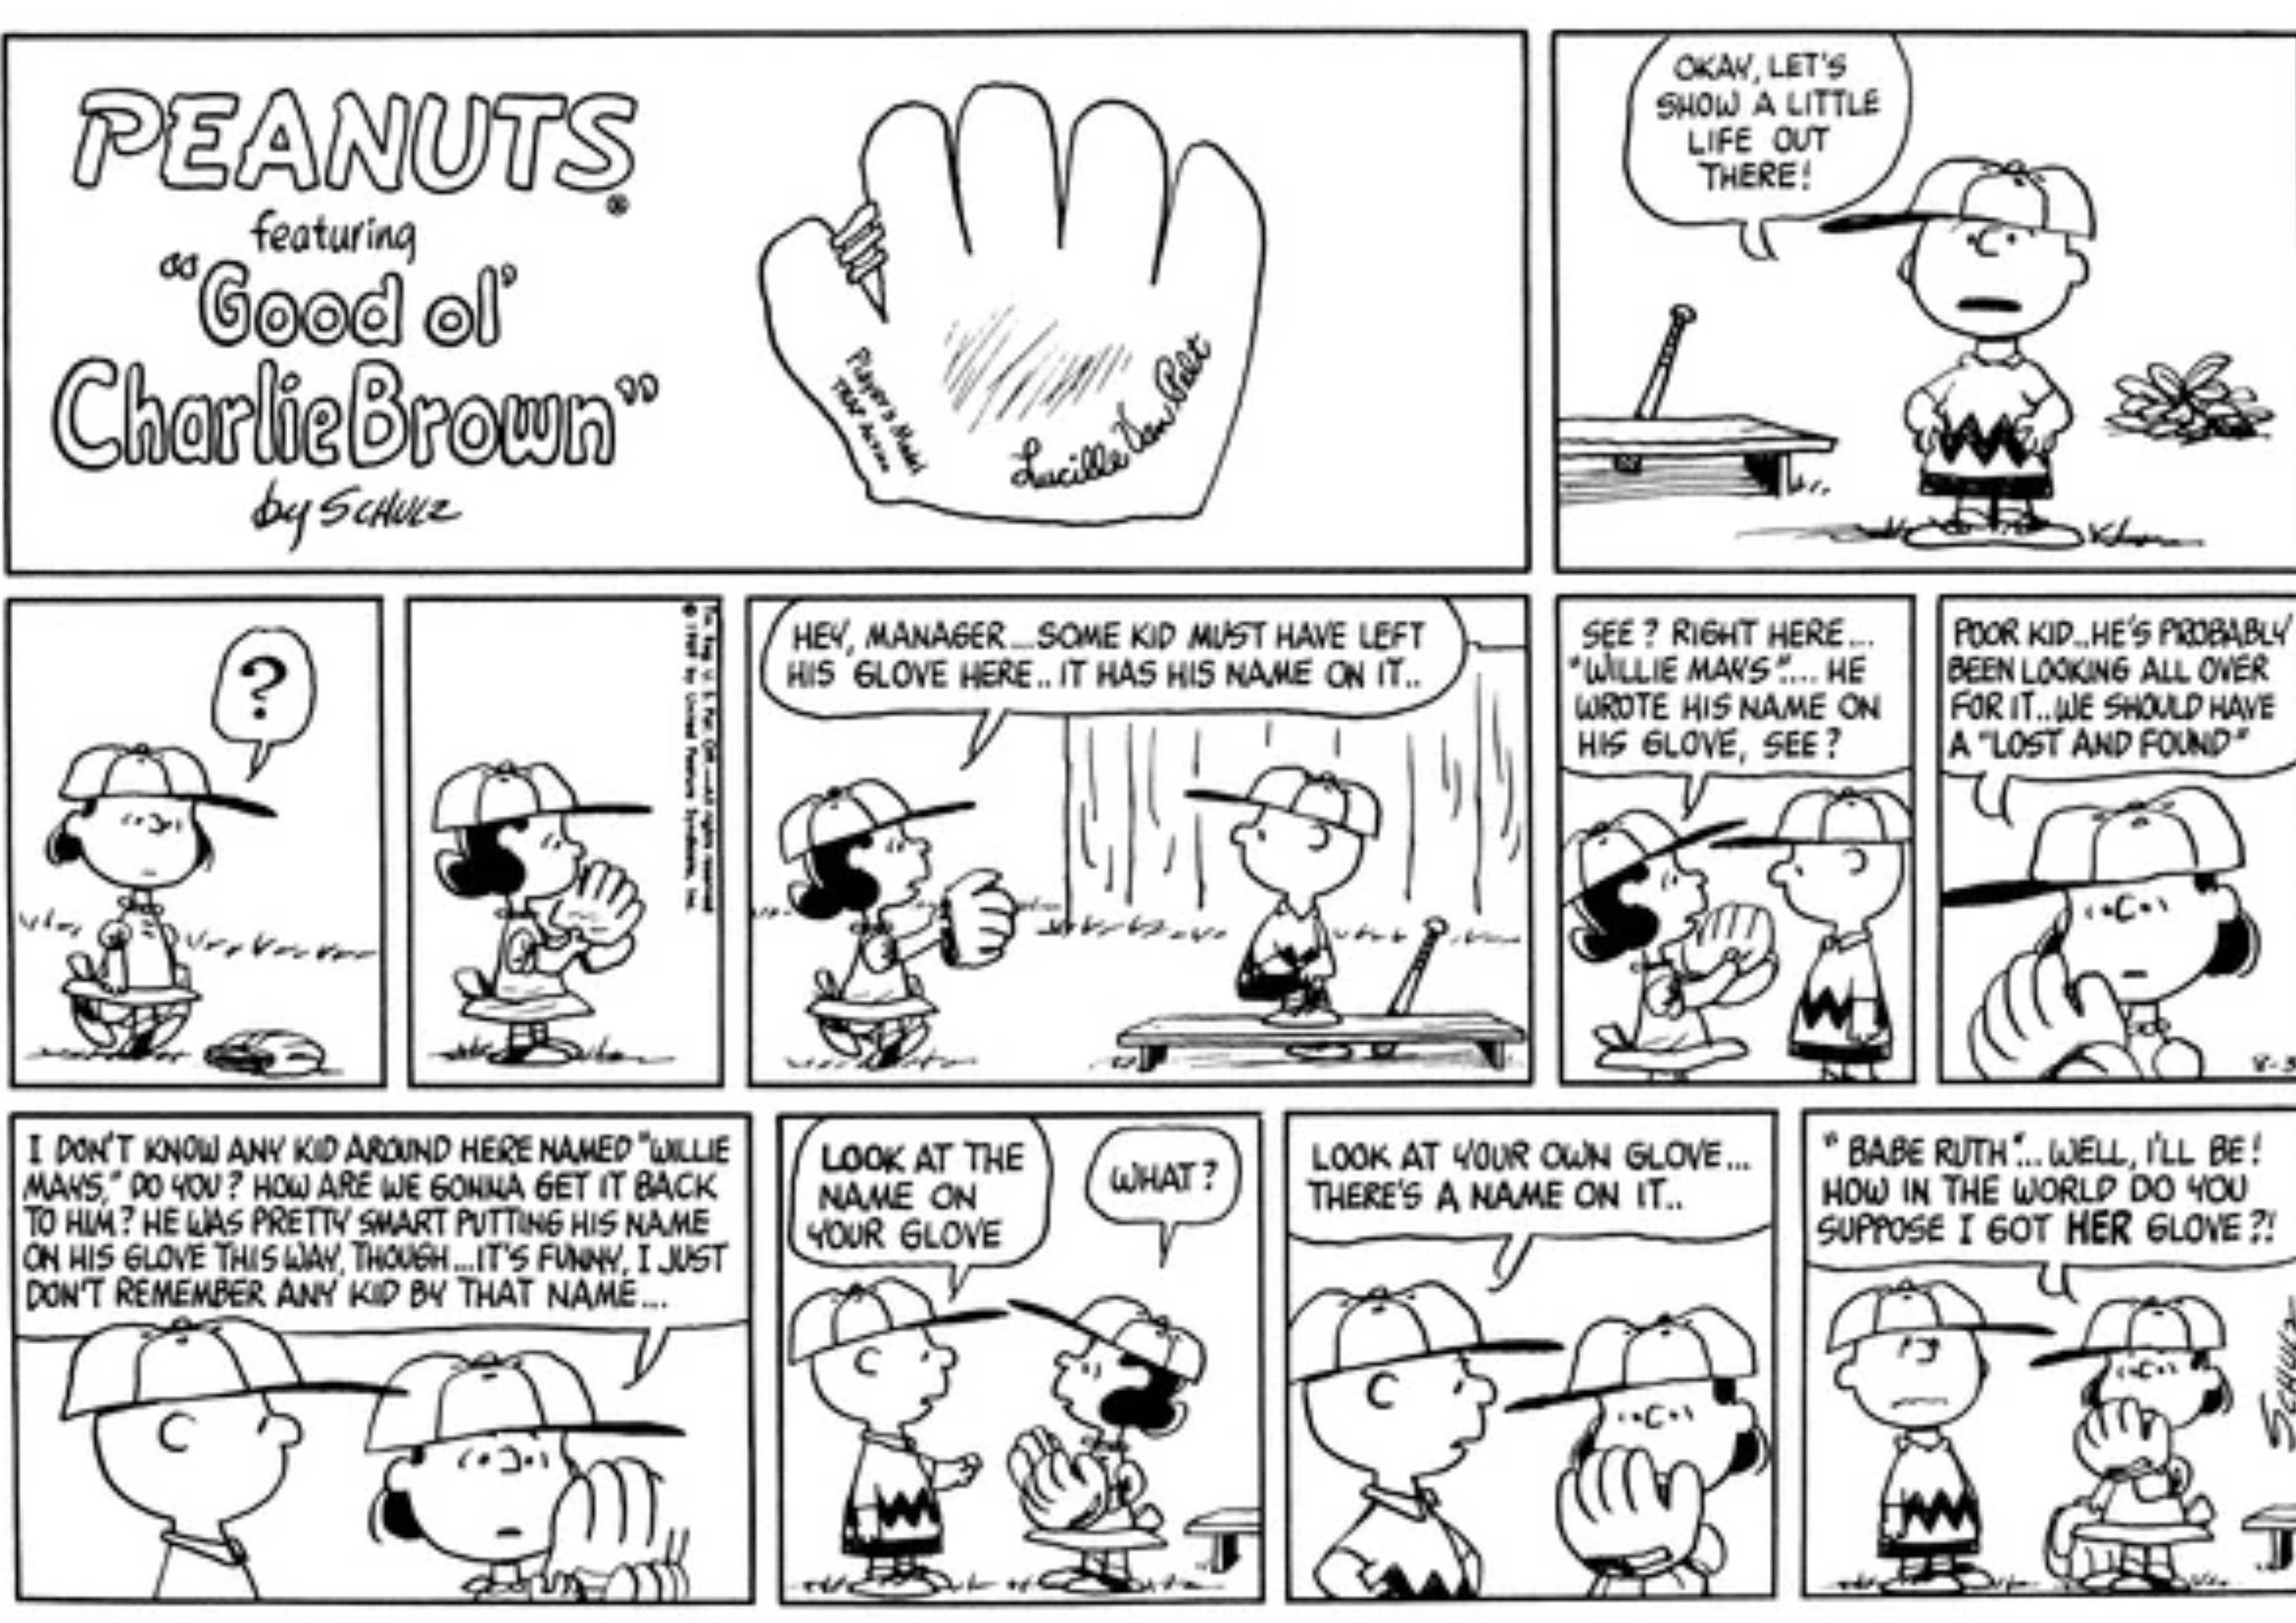 Charlie Brown and Lucy in Peanuts.